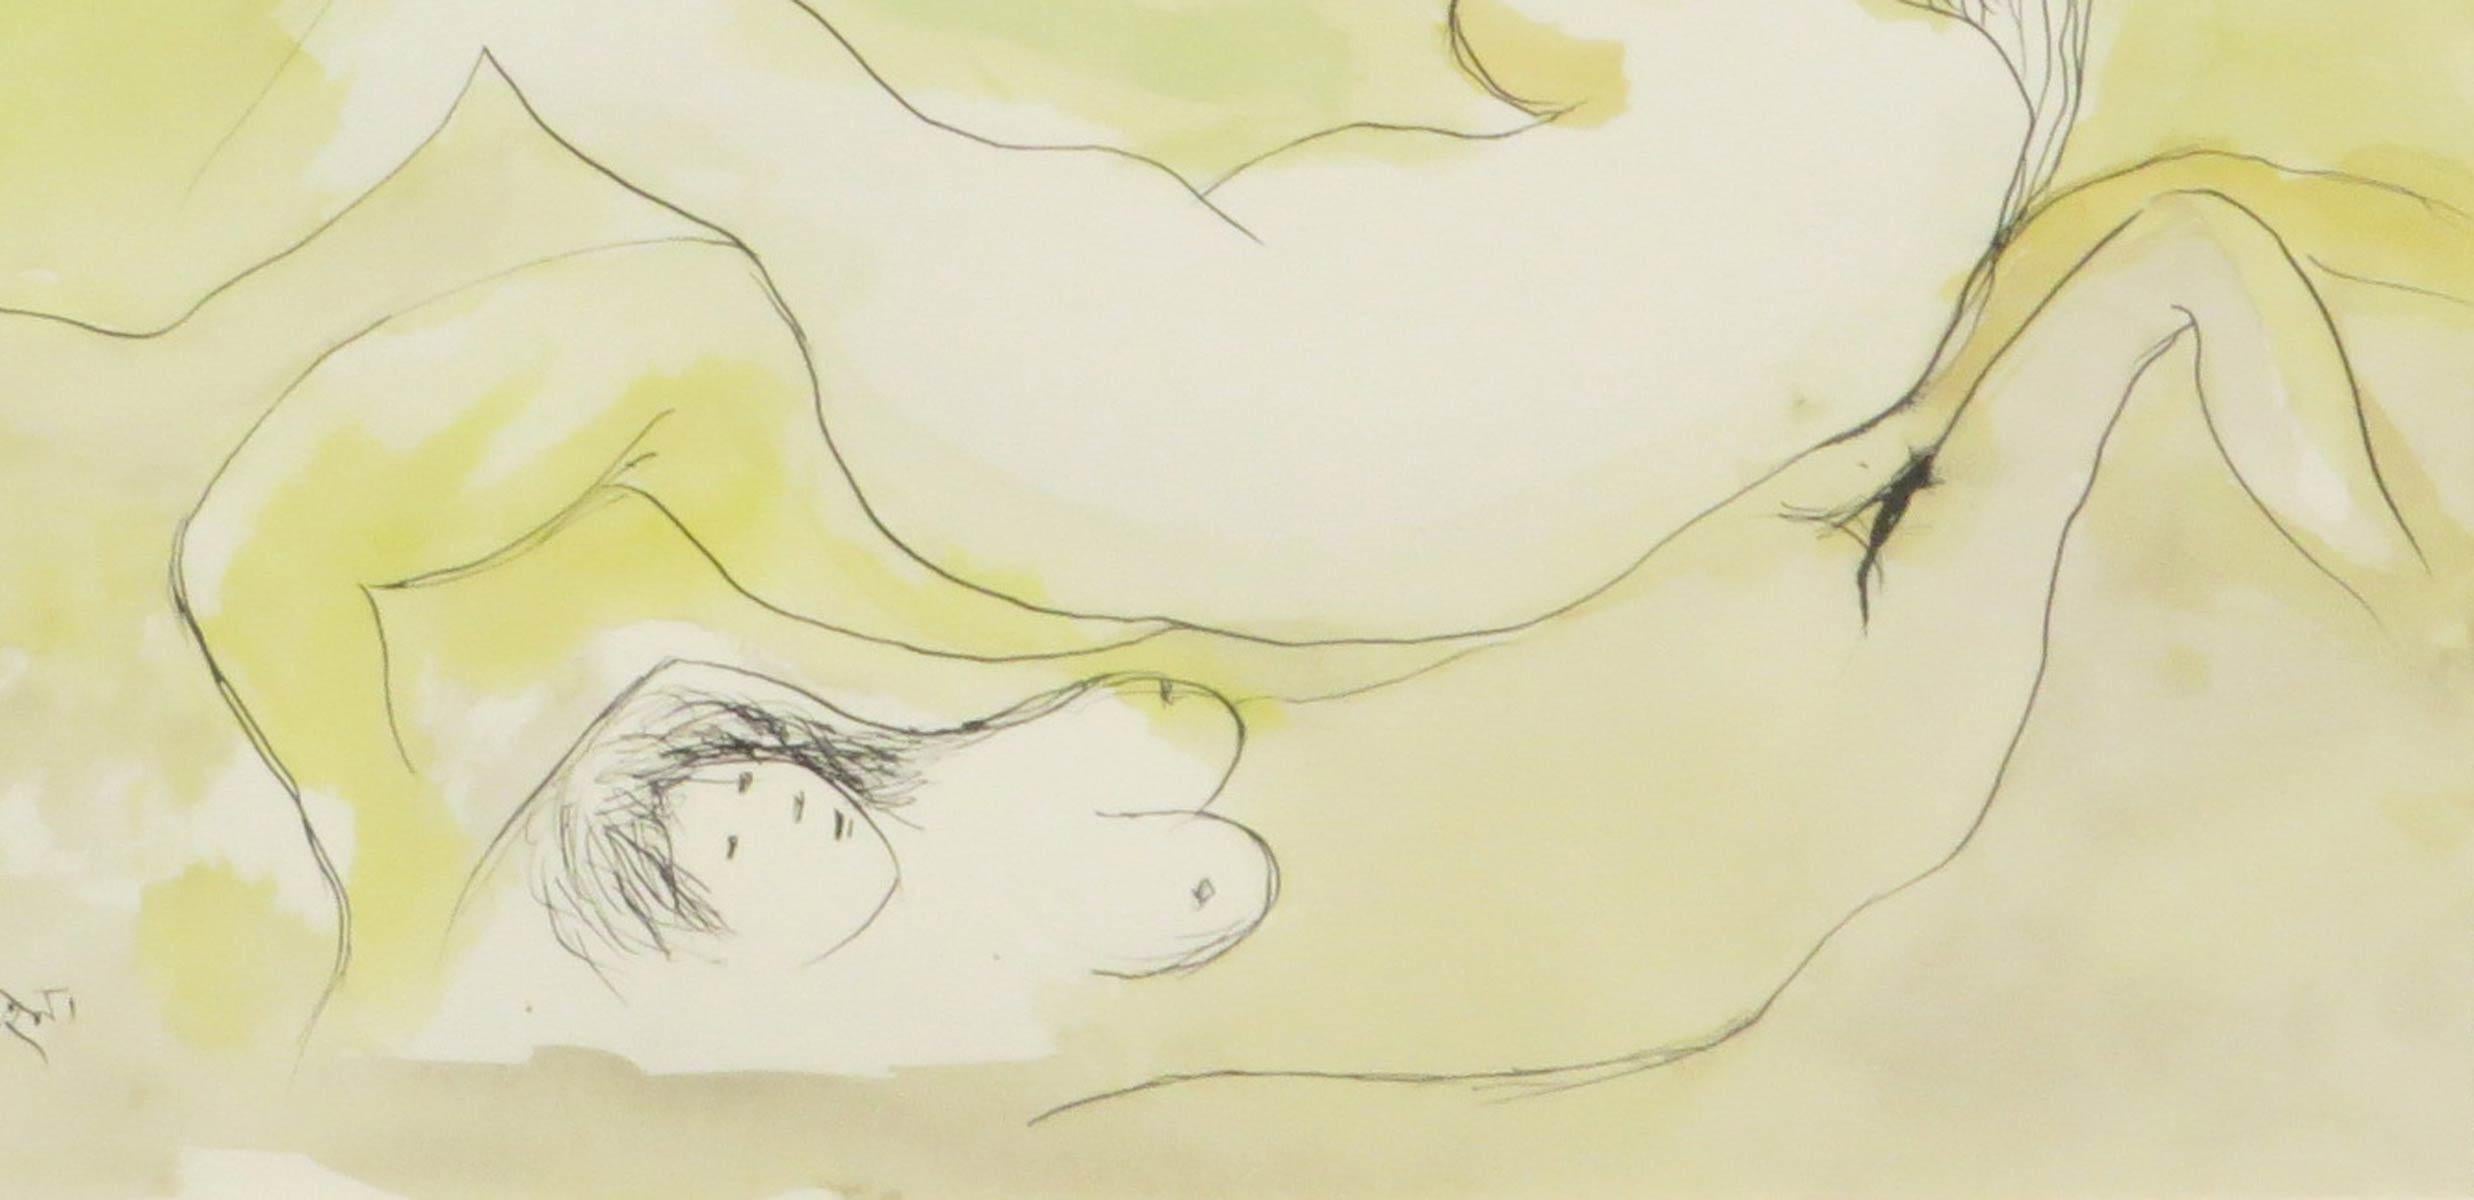 Nude Women, Bathing, Watercolor on paper, Green, Yellow by K. C. Pyne 